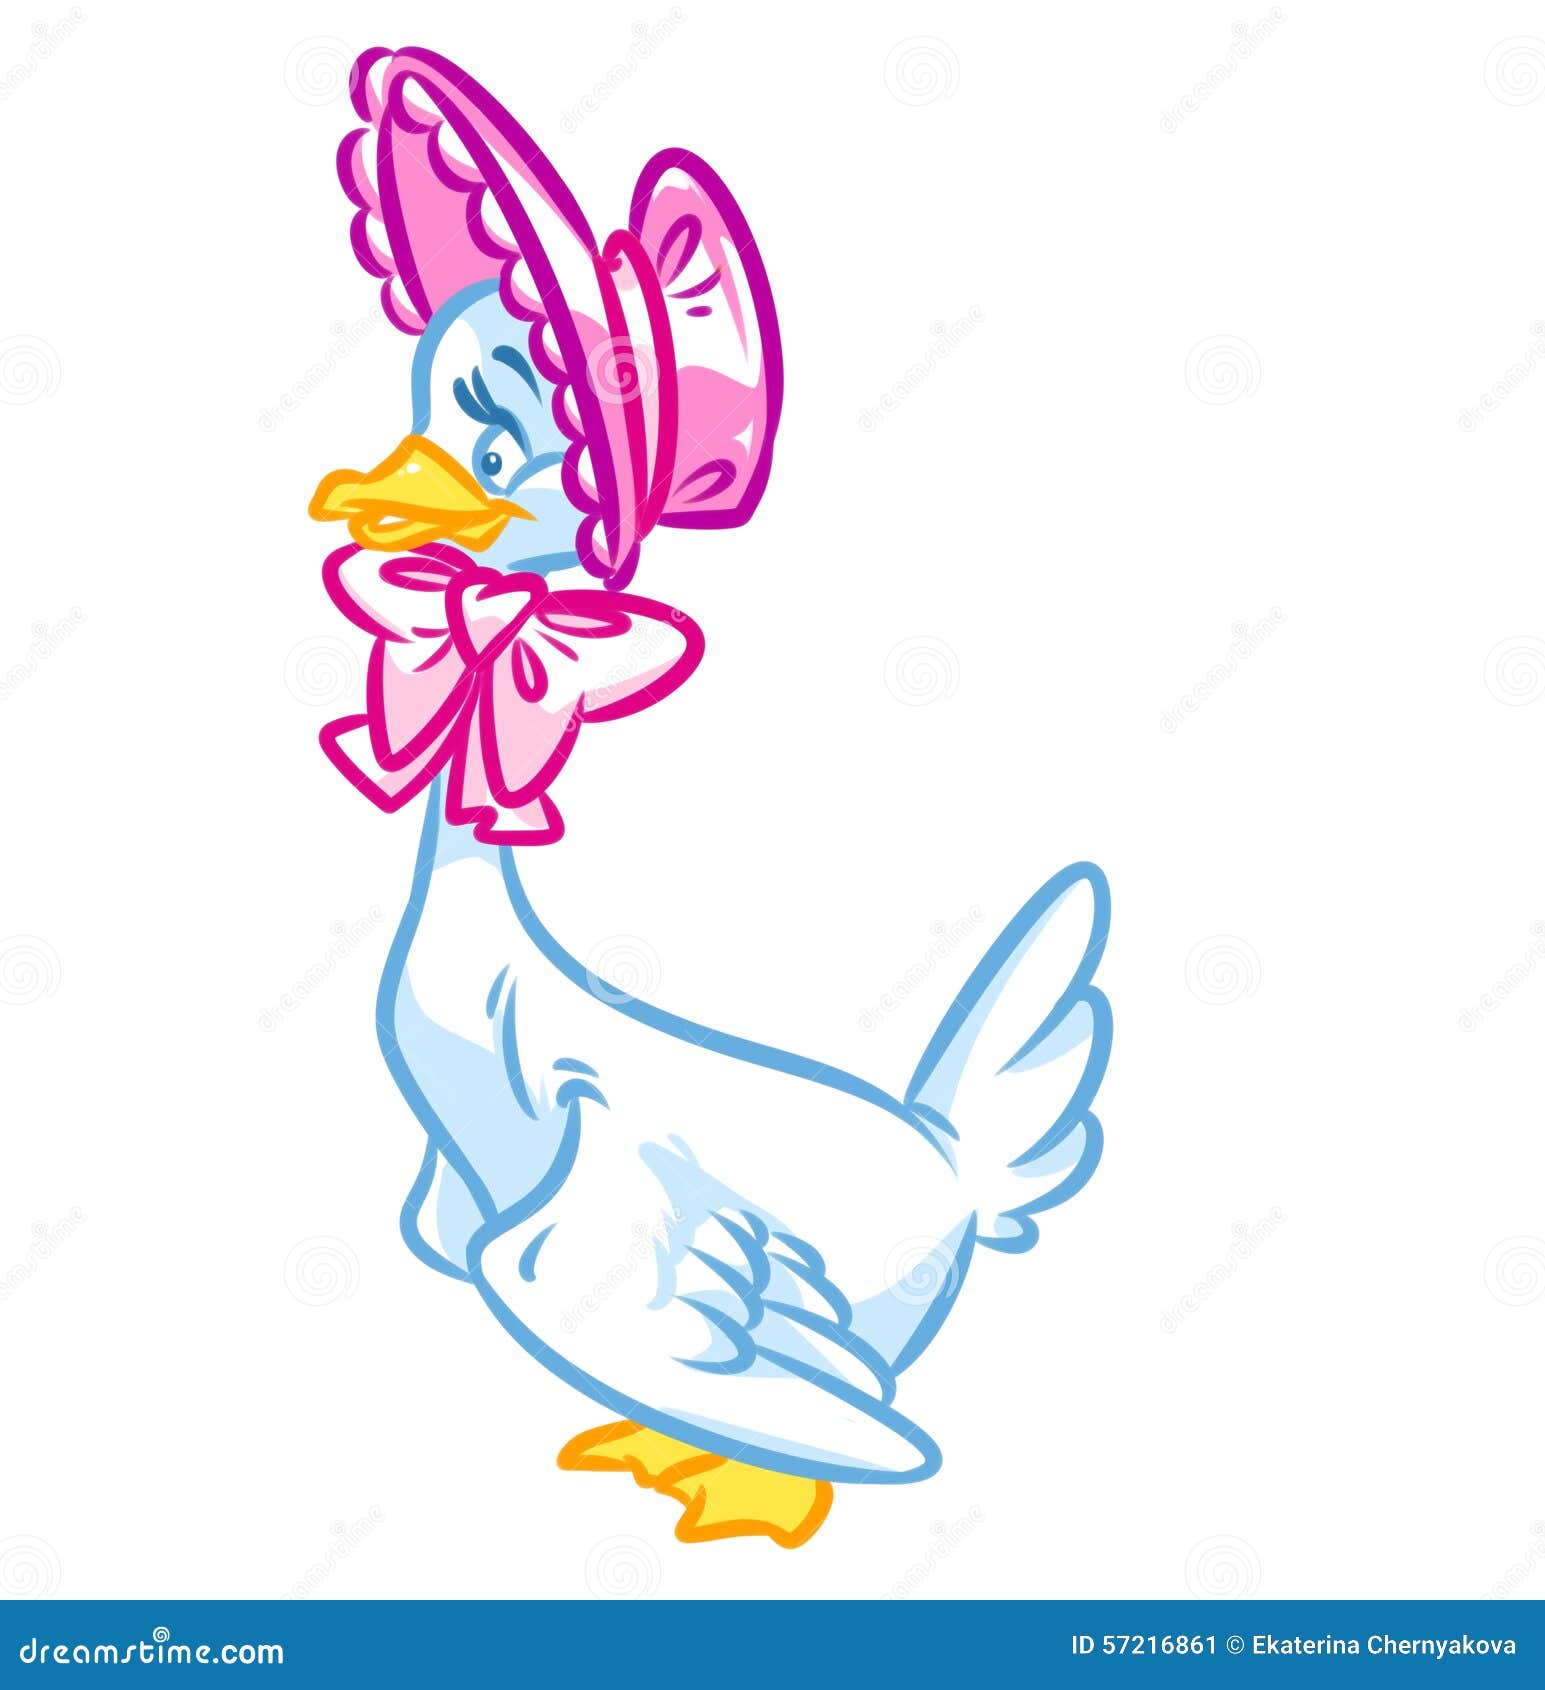 mother goose clipart images - photo #8